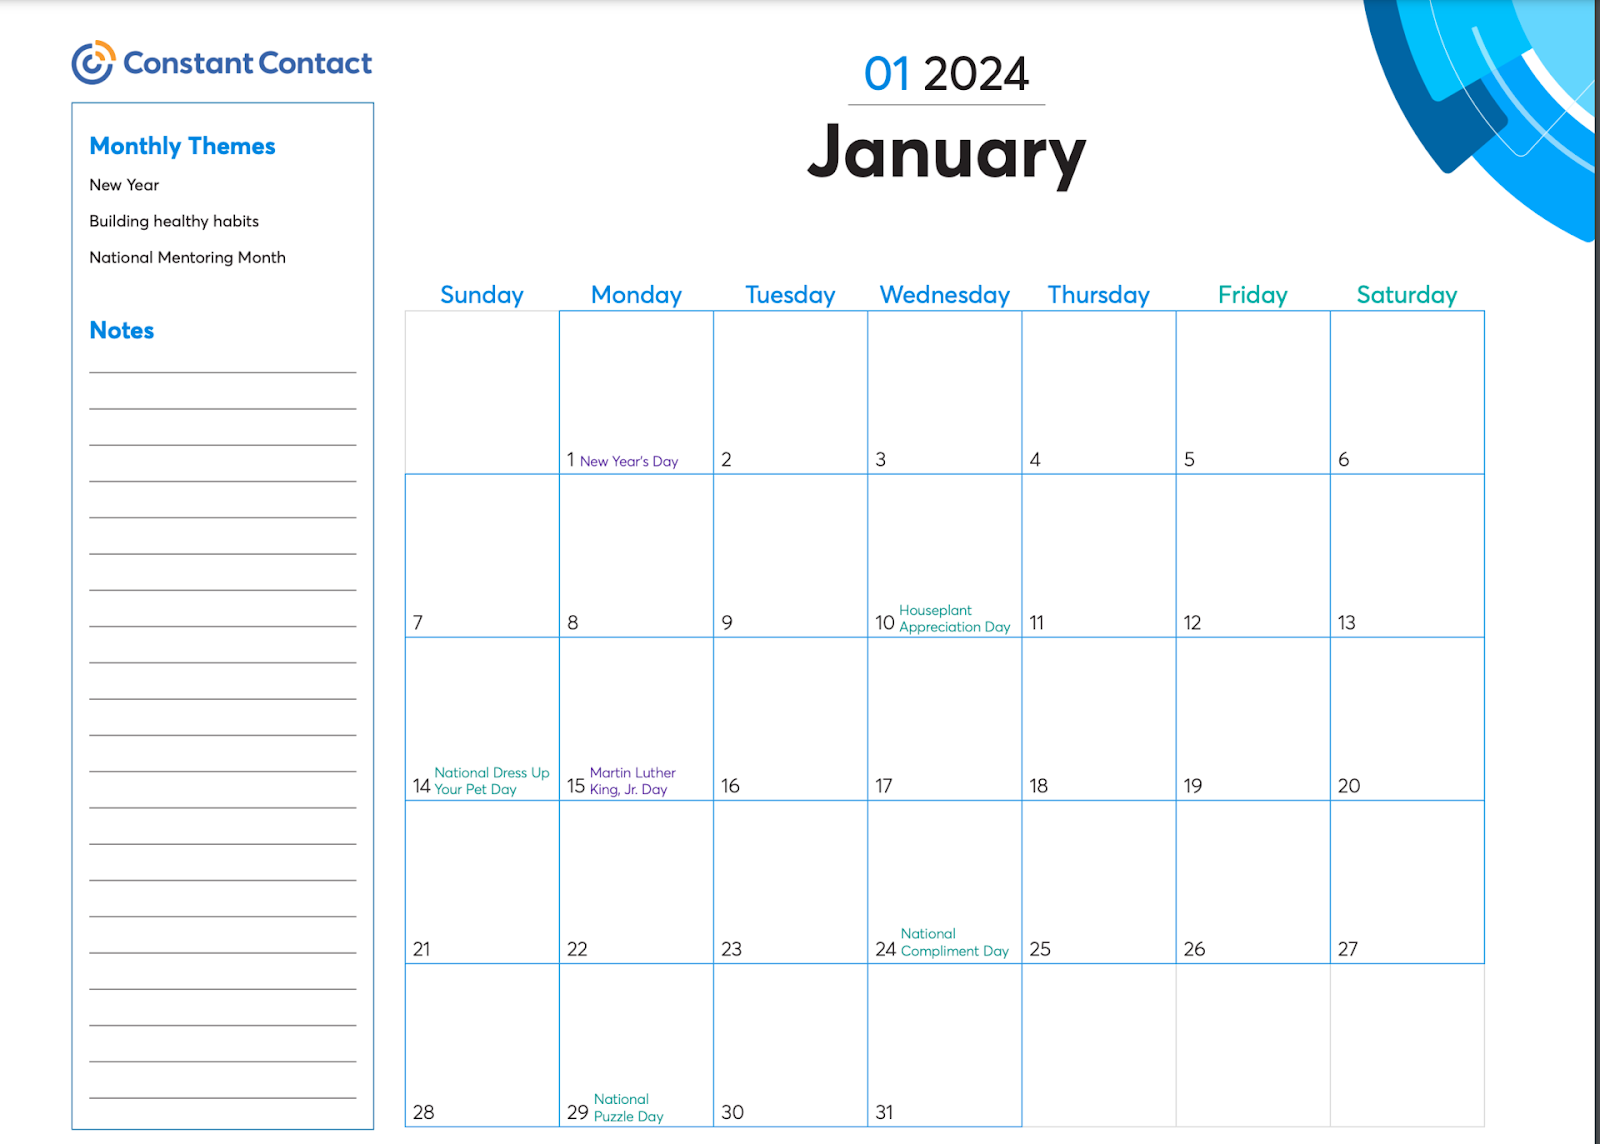 Sample content calendar from Constant Contact